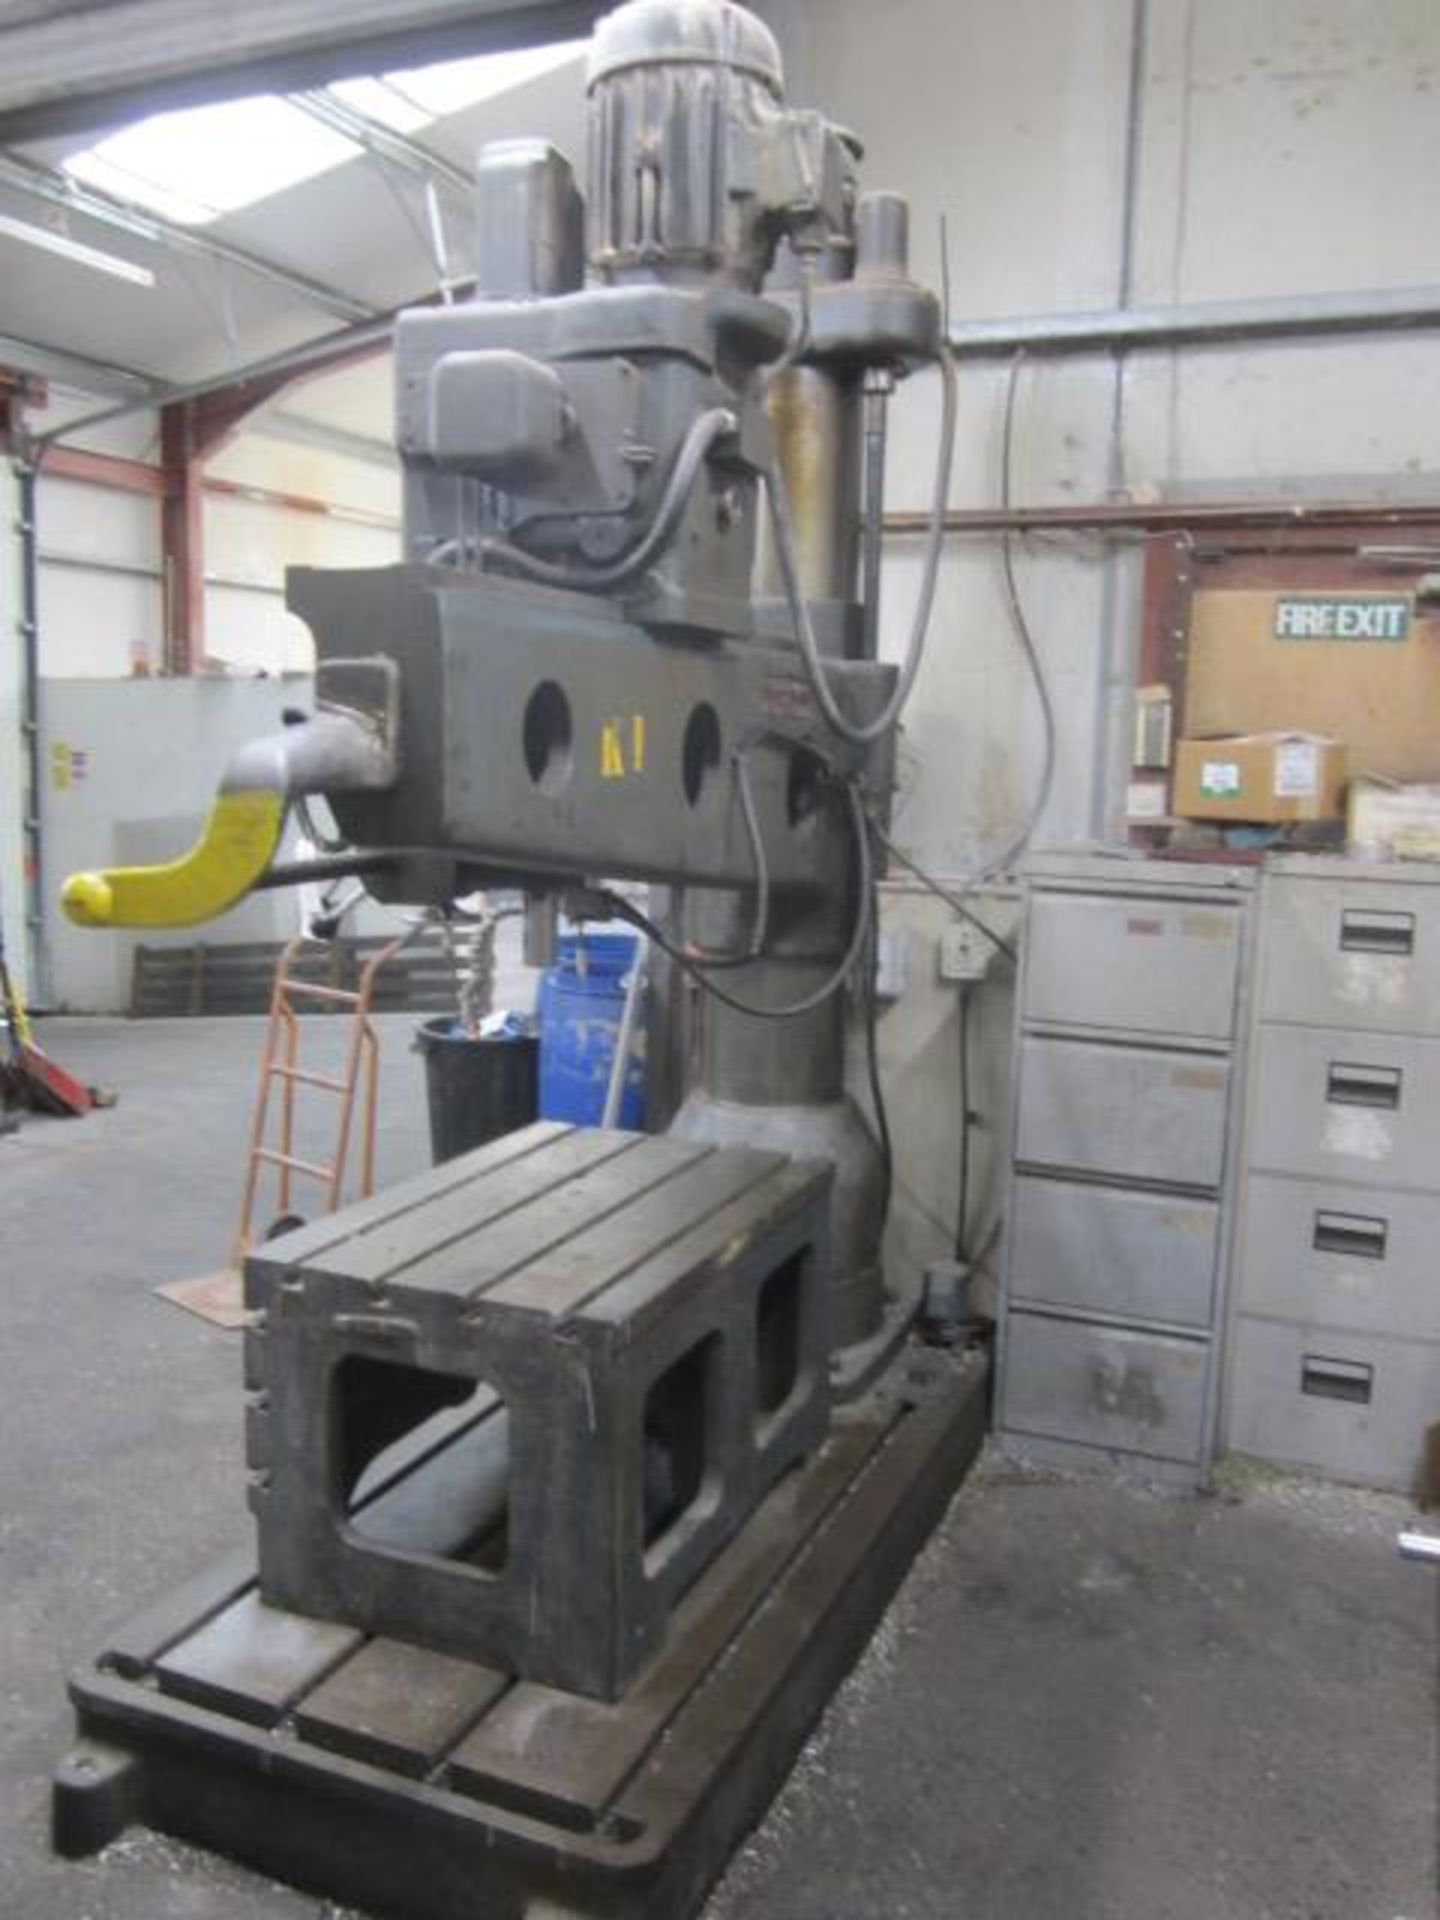 Kitchen & Walker E26 elevating column radial arm drill, serial no. 16981, circa 48" swing, with - Image 7 of 7